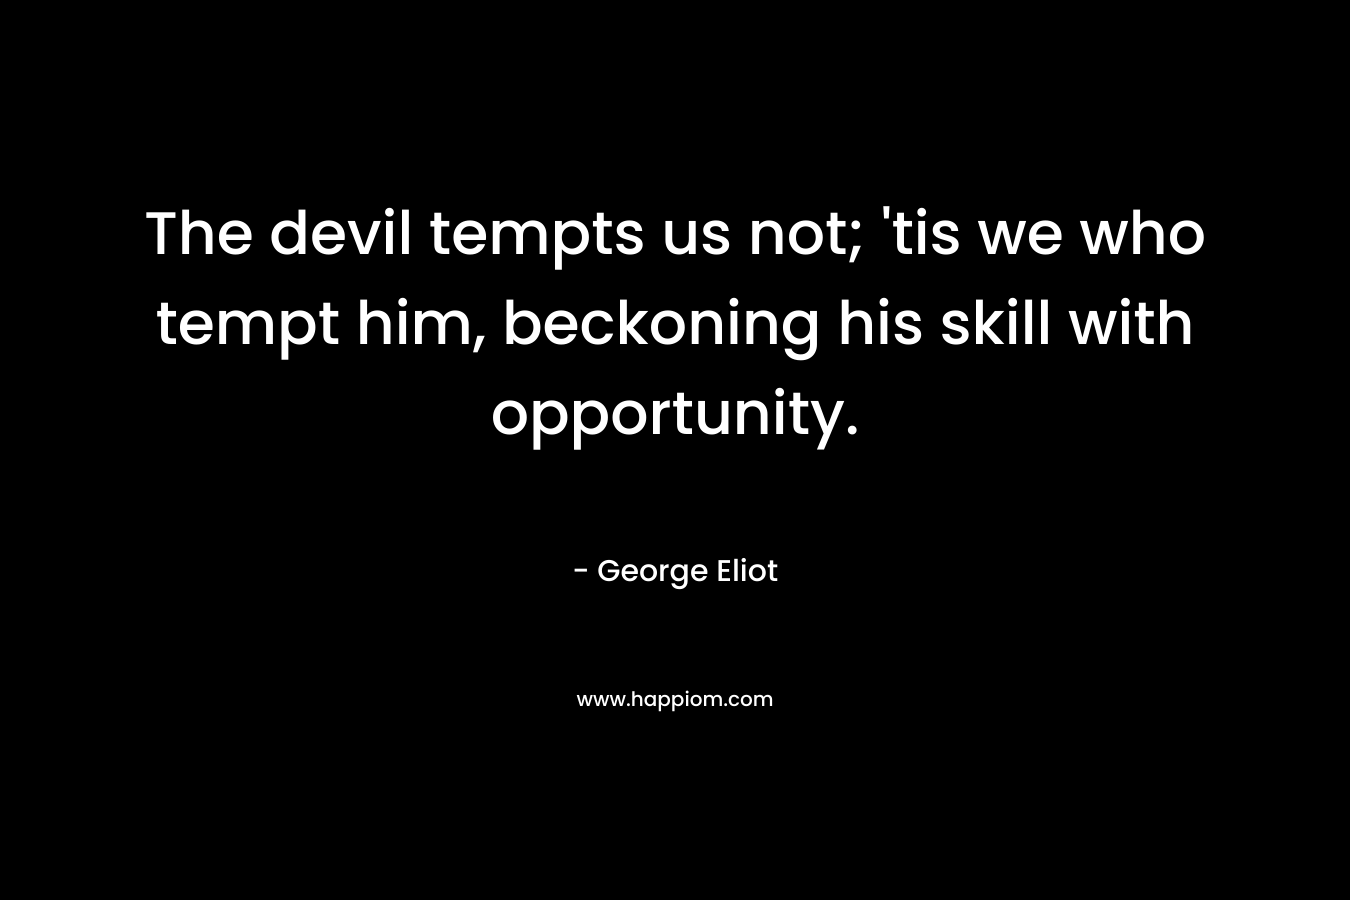 The devil tempts us not; ’tis we who tempt him, beckoning his skill with opportunity. – George Eliot